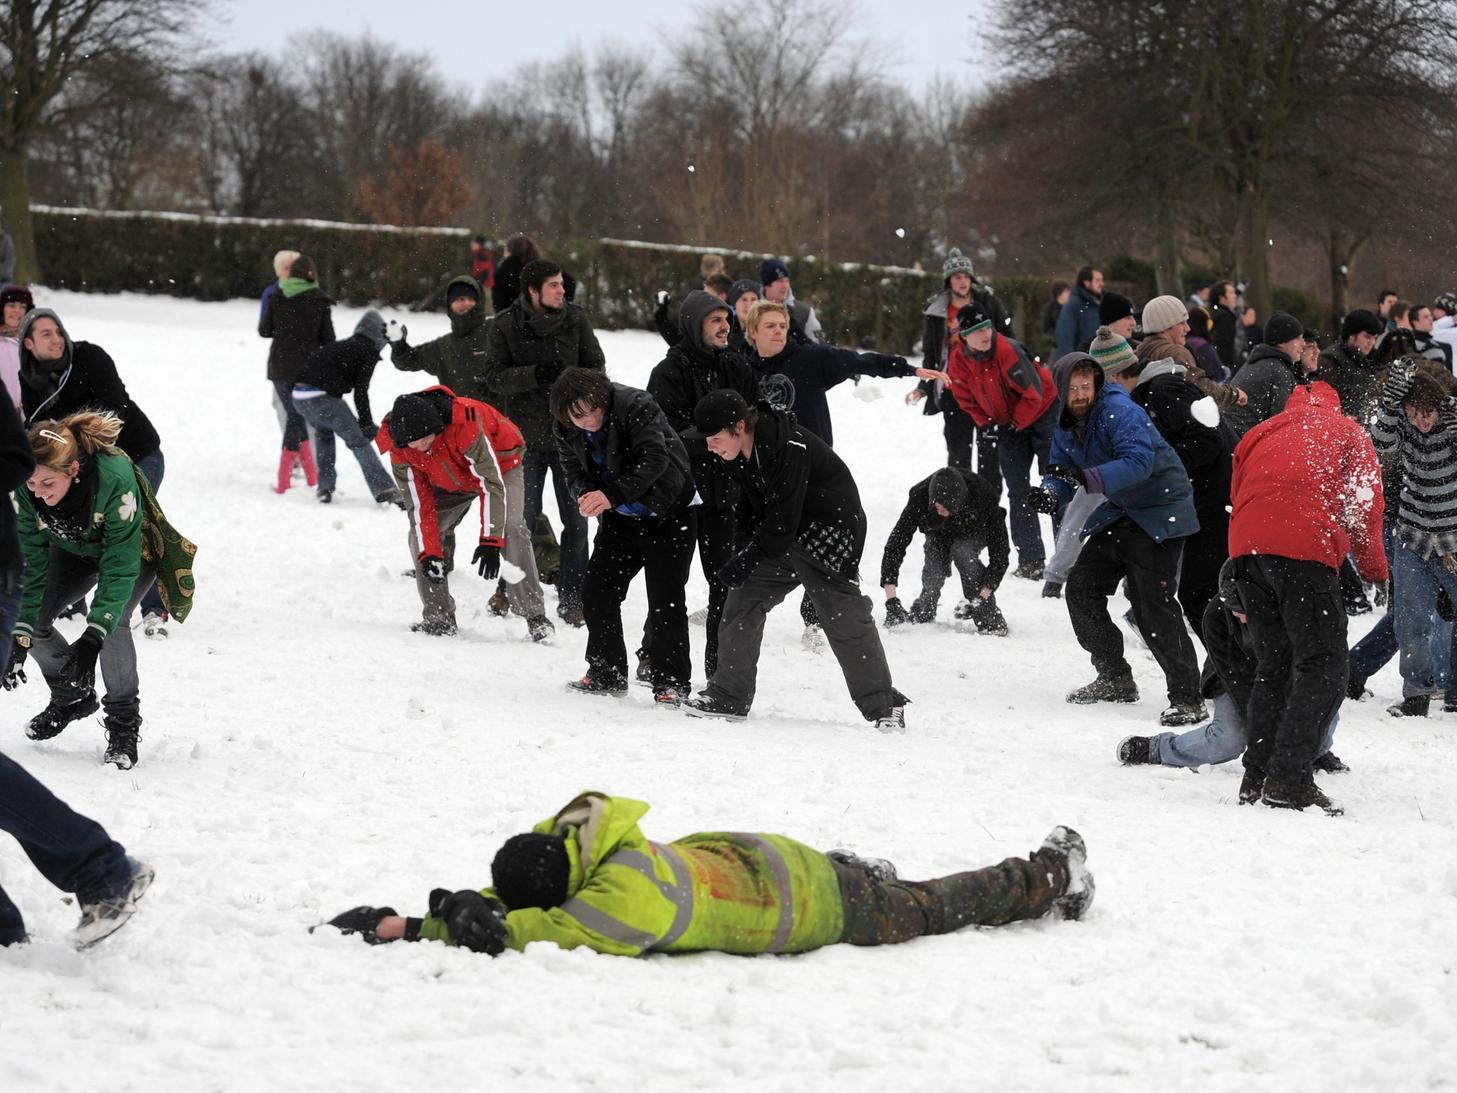 Was this man felled by a snowball? Or did he slip in the snow?